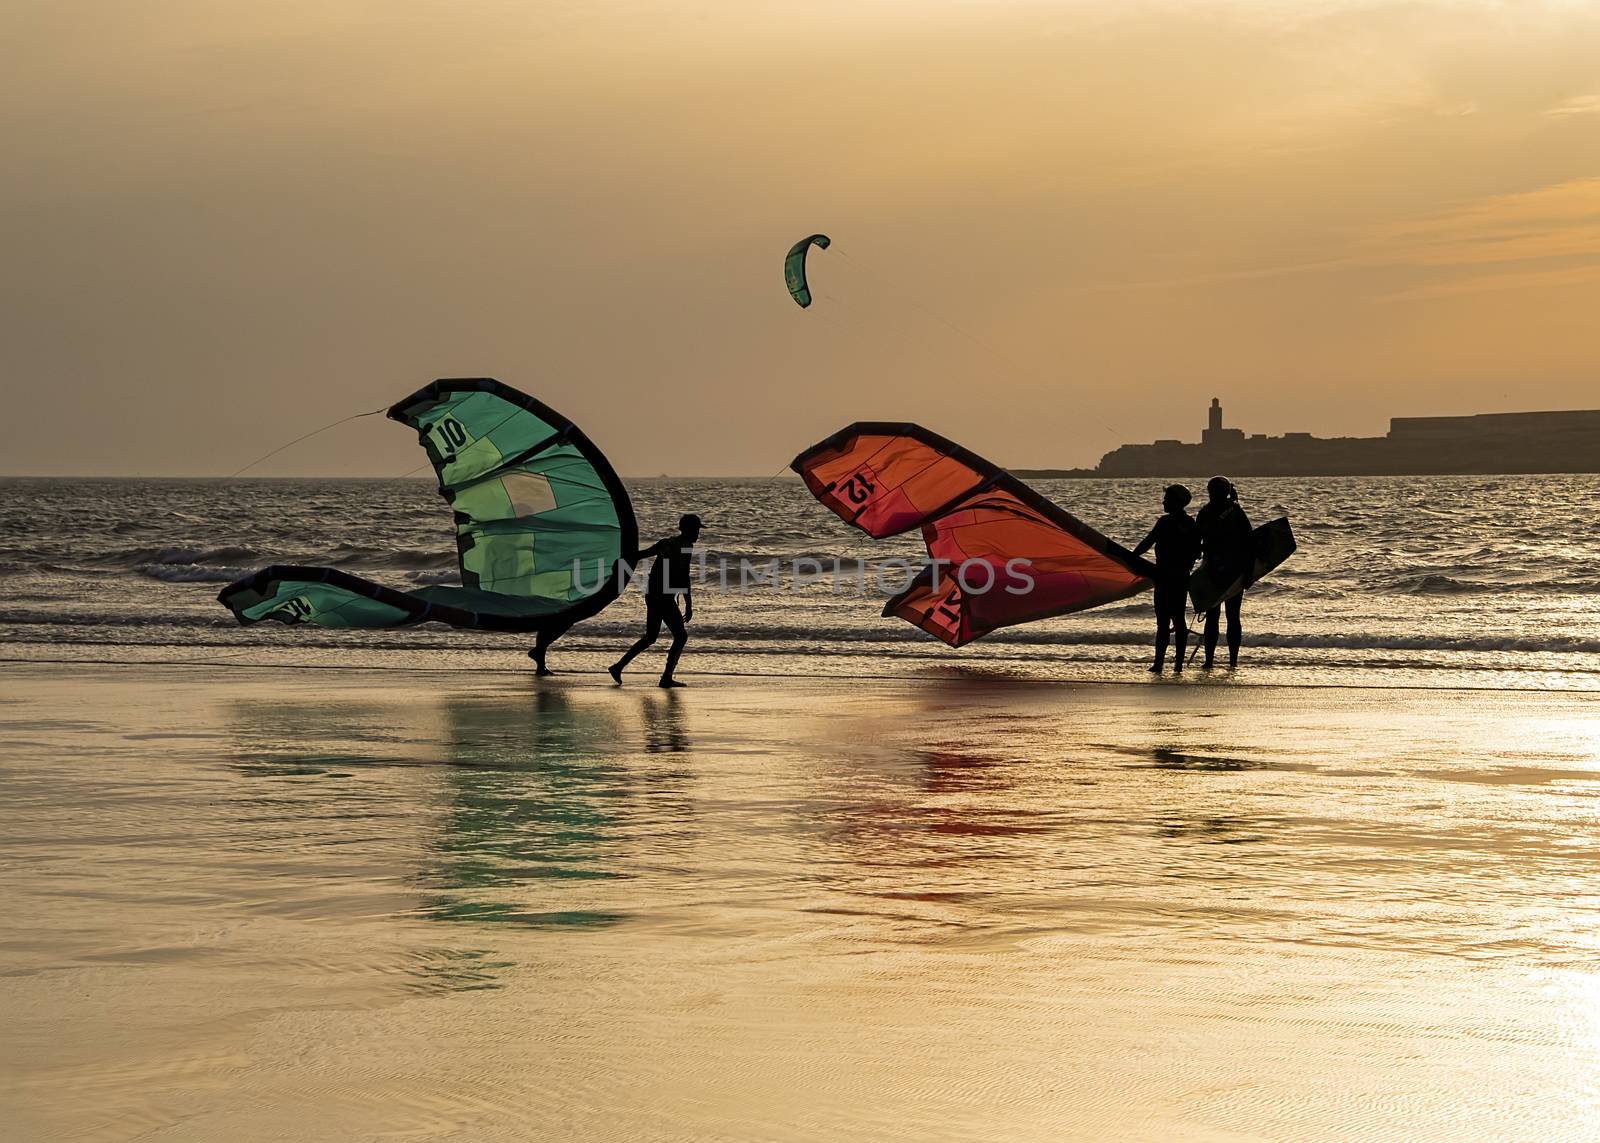 Kite surfers returning from the sea as the sun sets by mrs_vision